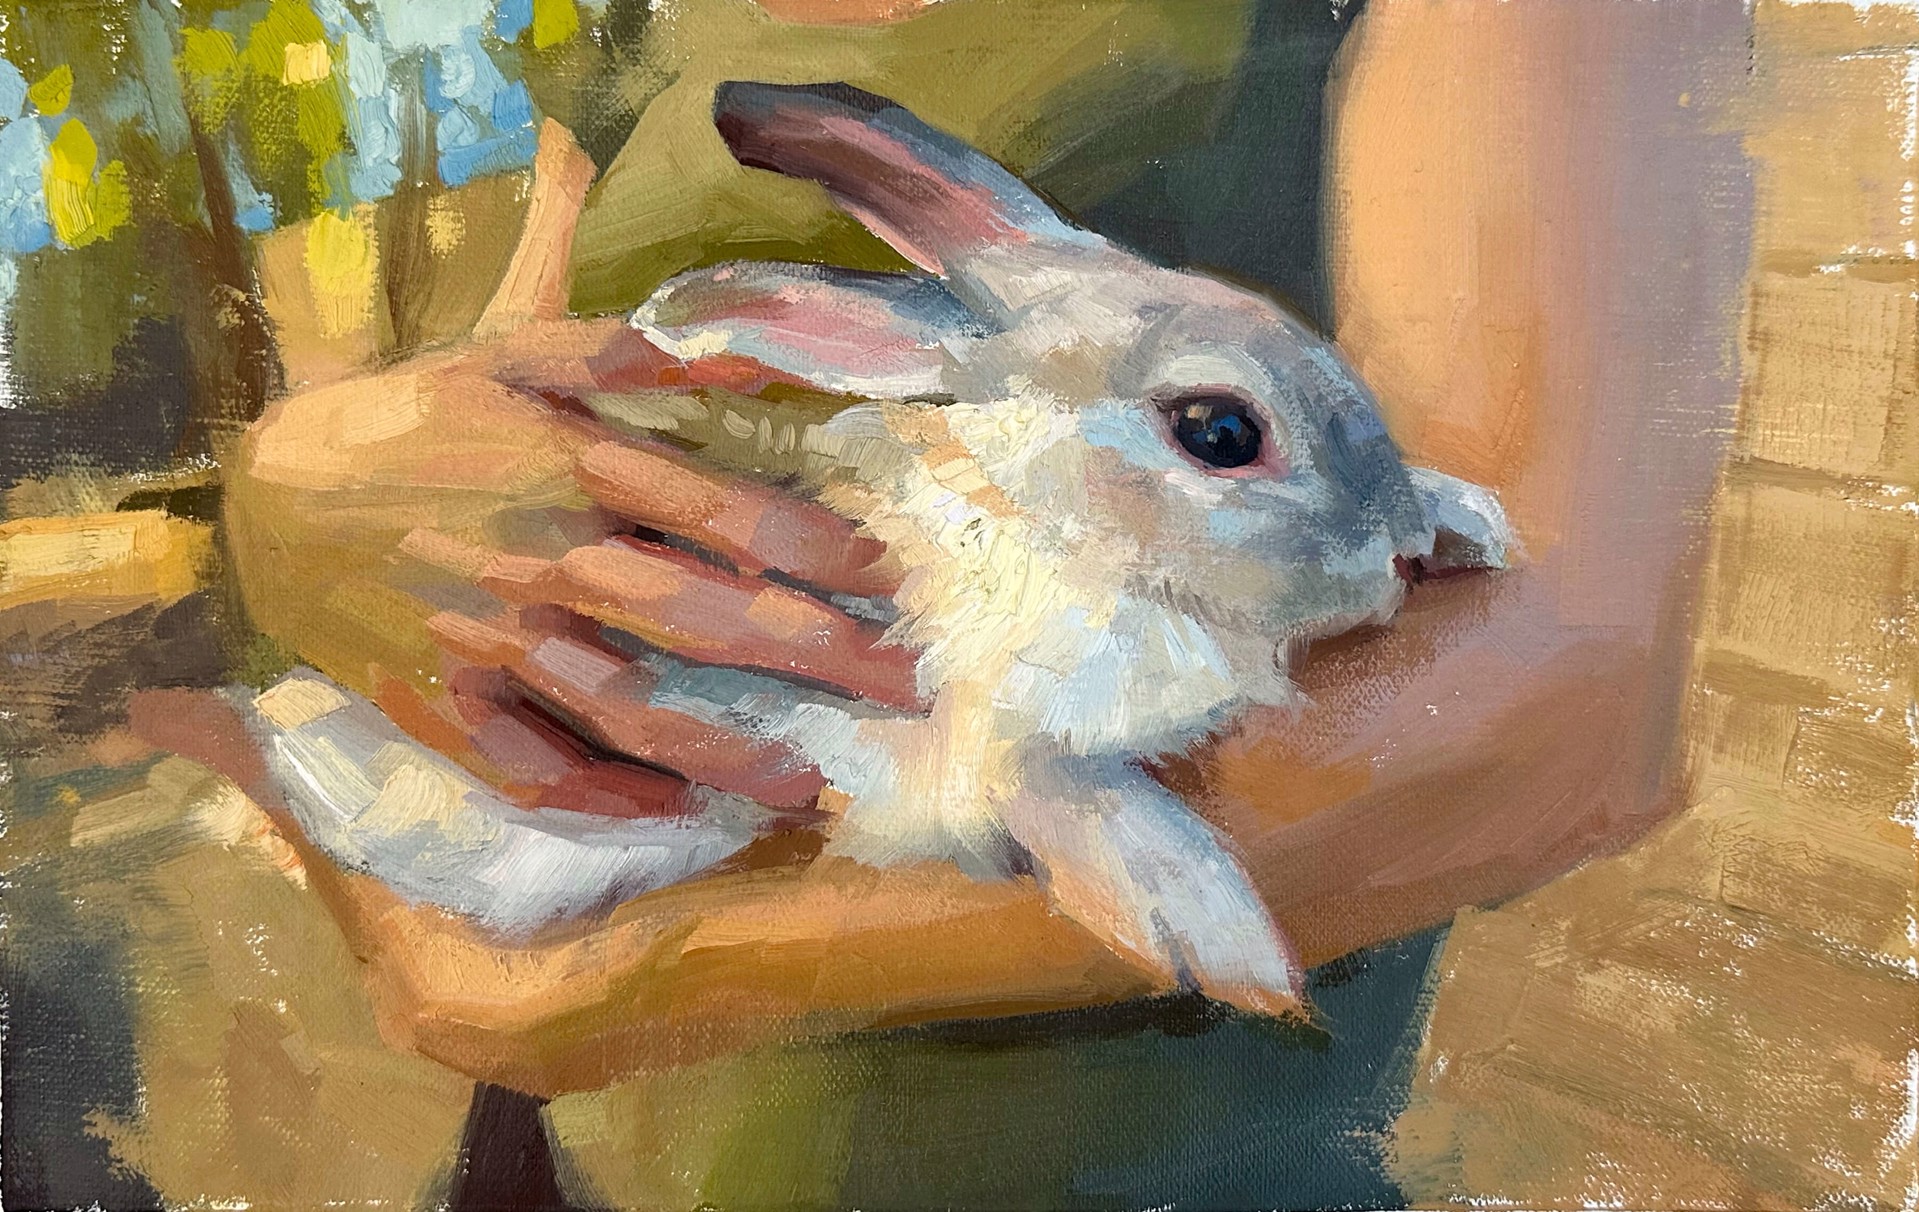 Rabbit in Arms by Robin Cole